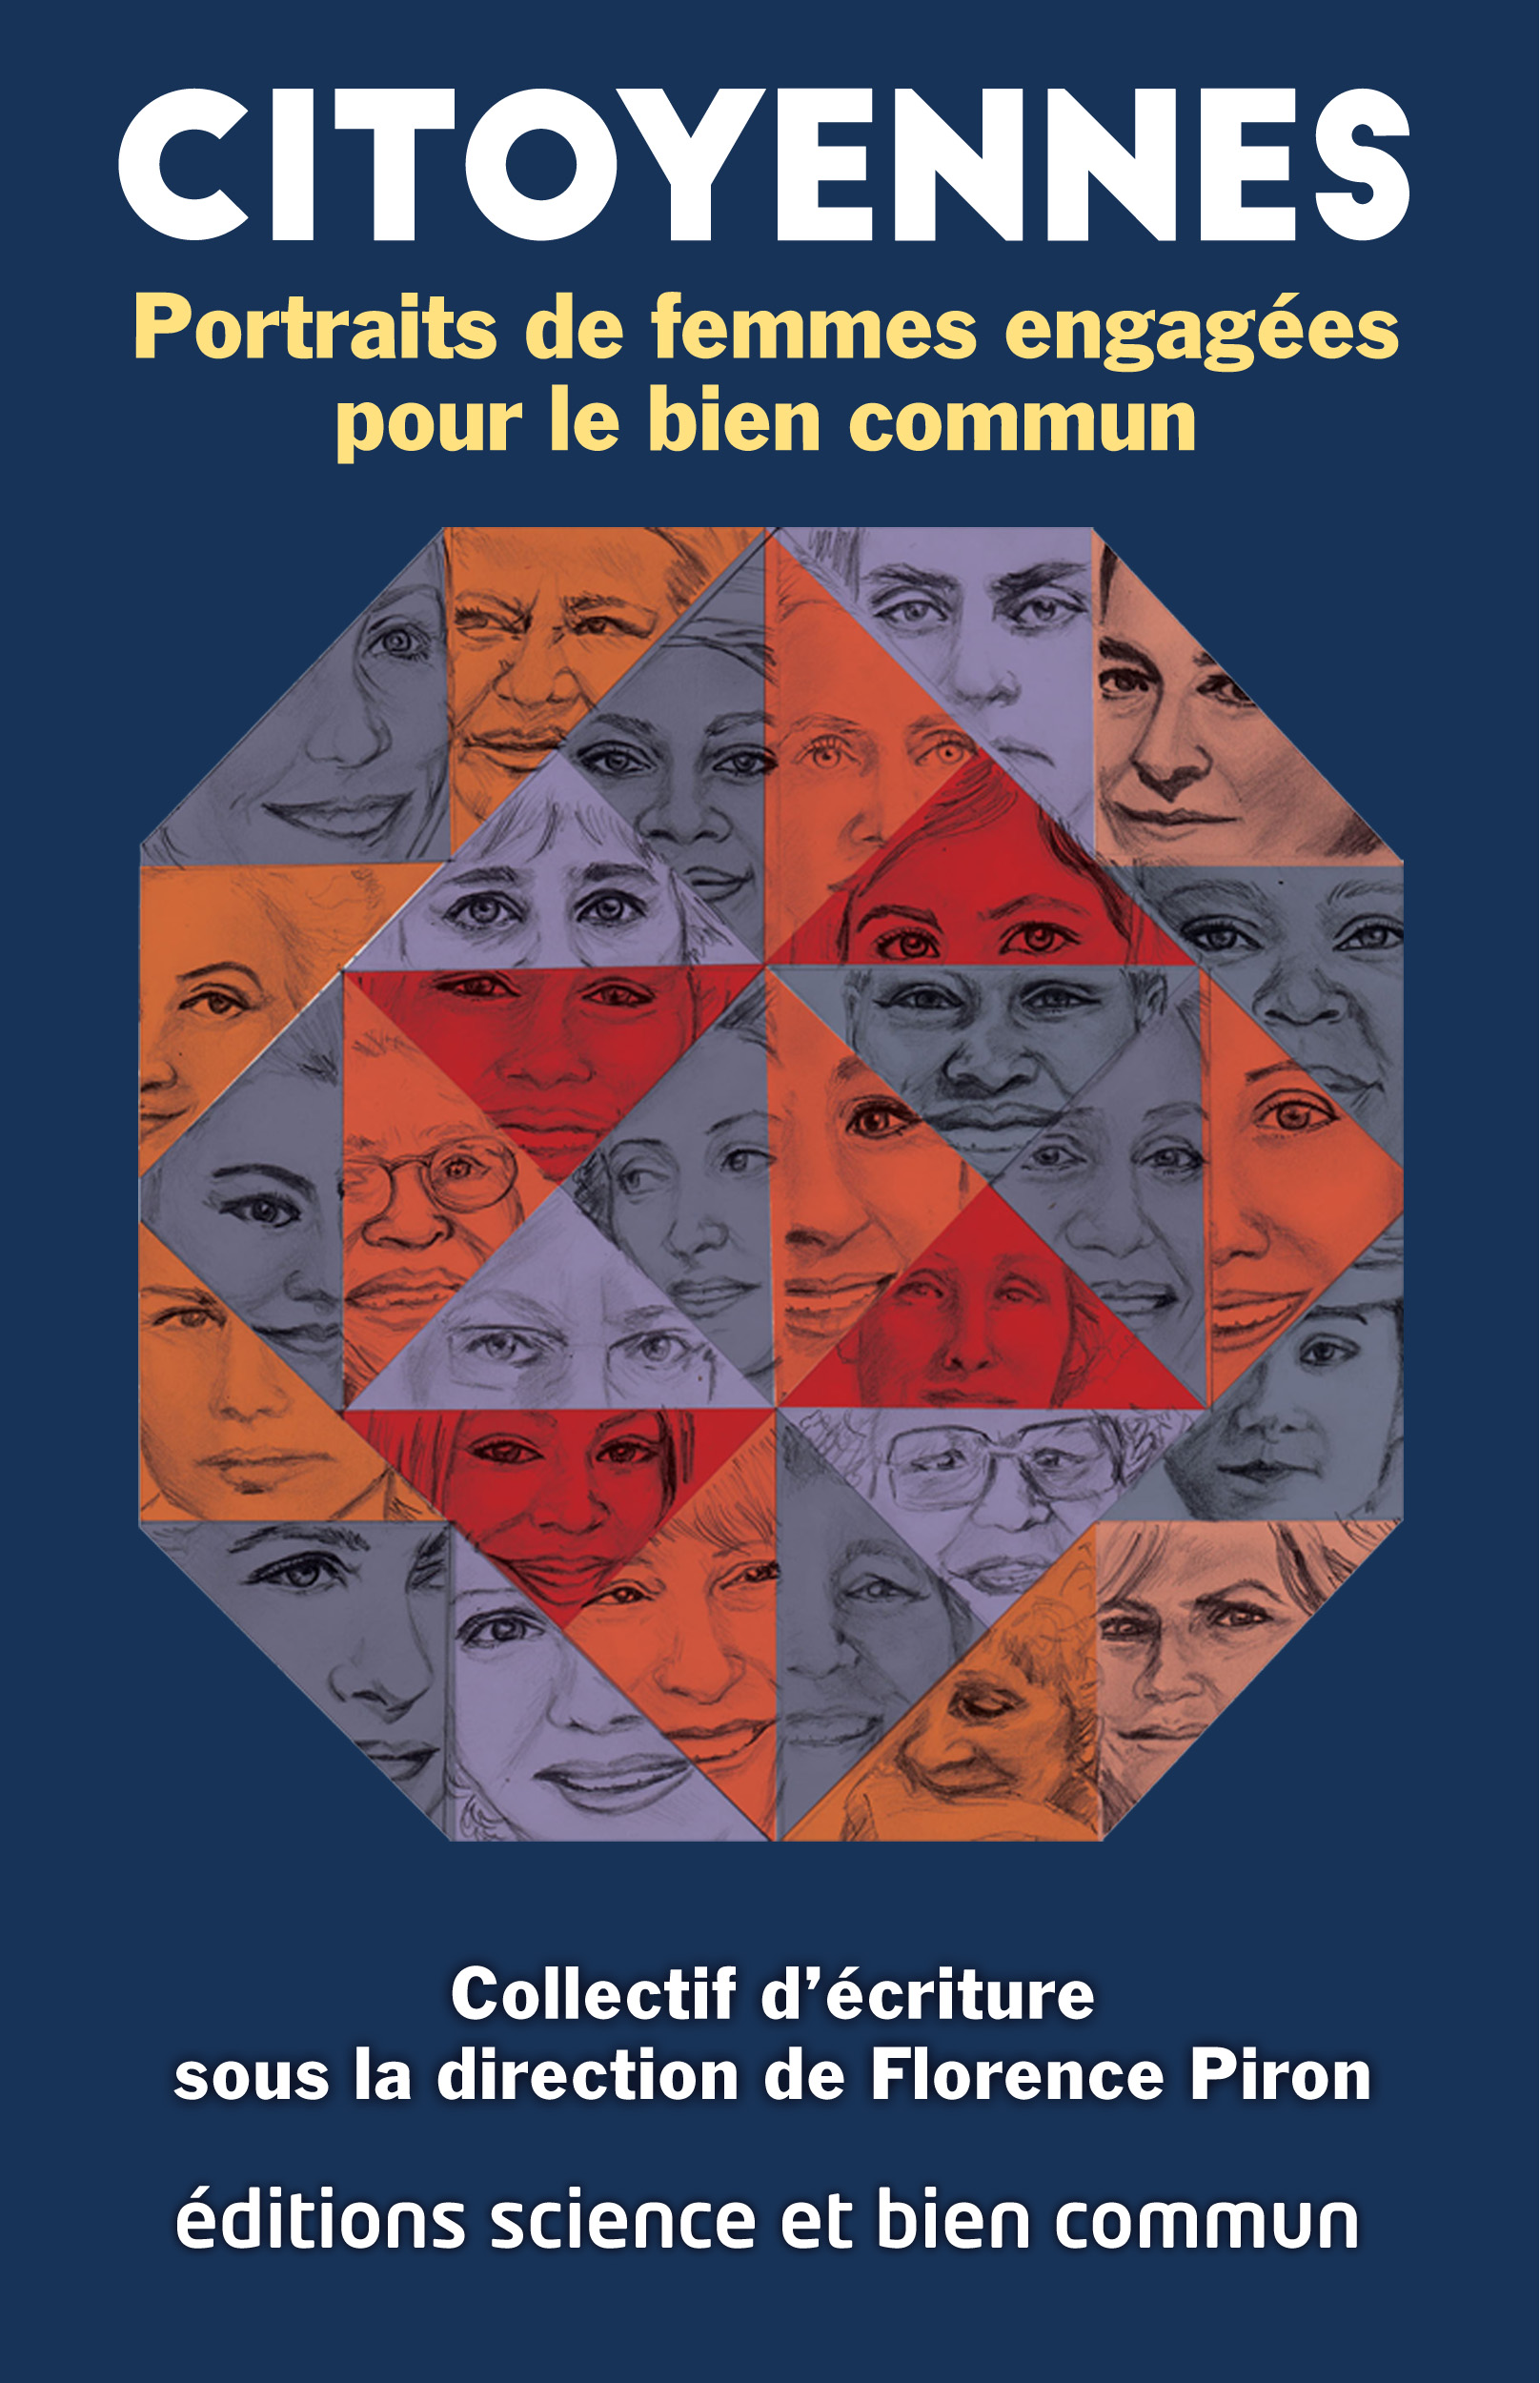 Citoyennes book cover